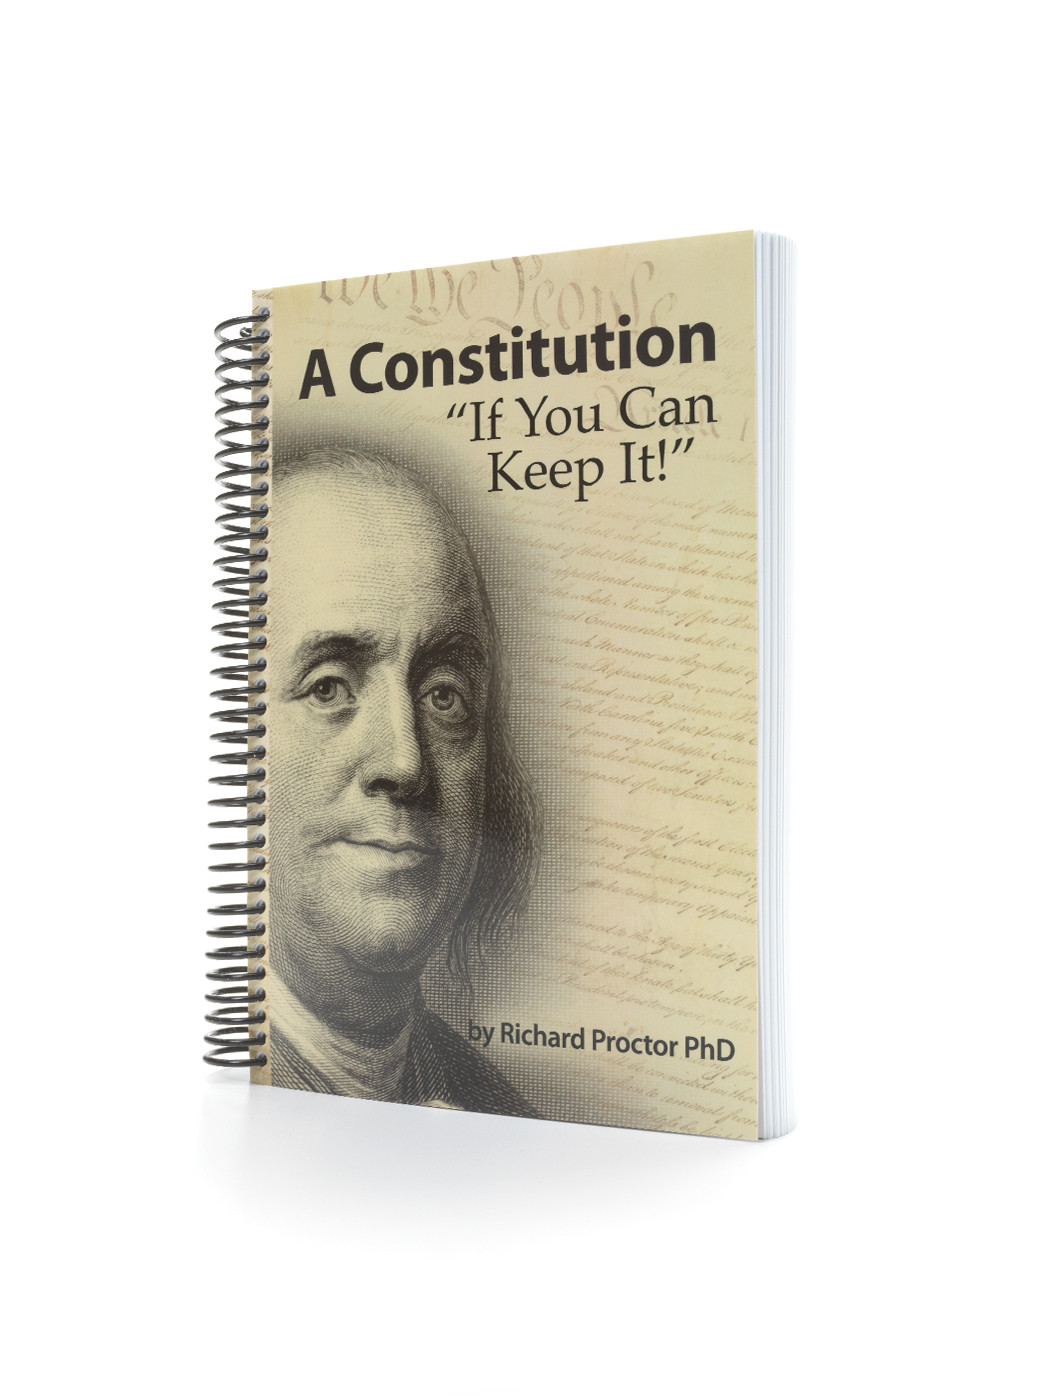 A Constitution - If You Can Keep It